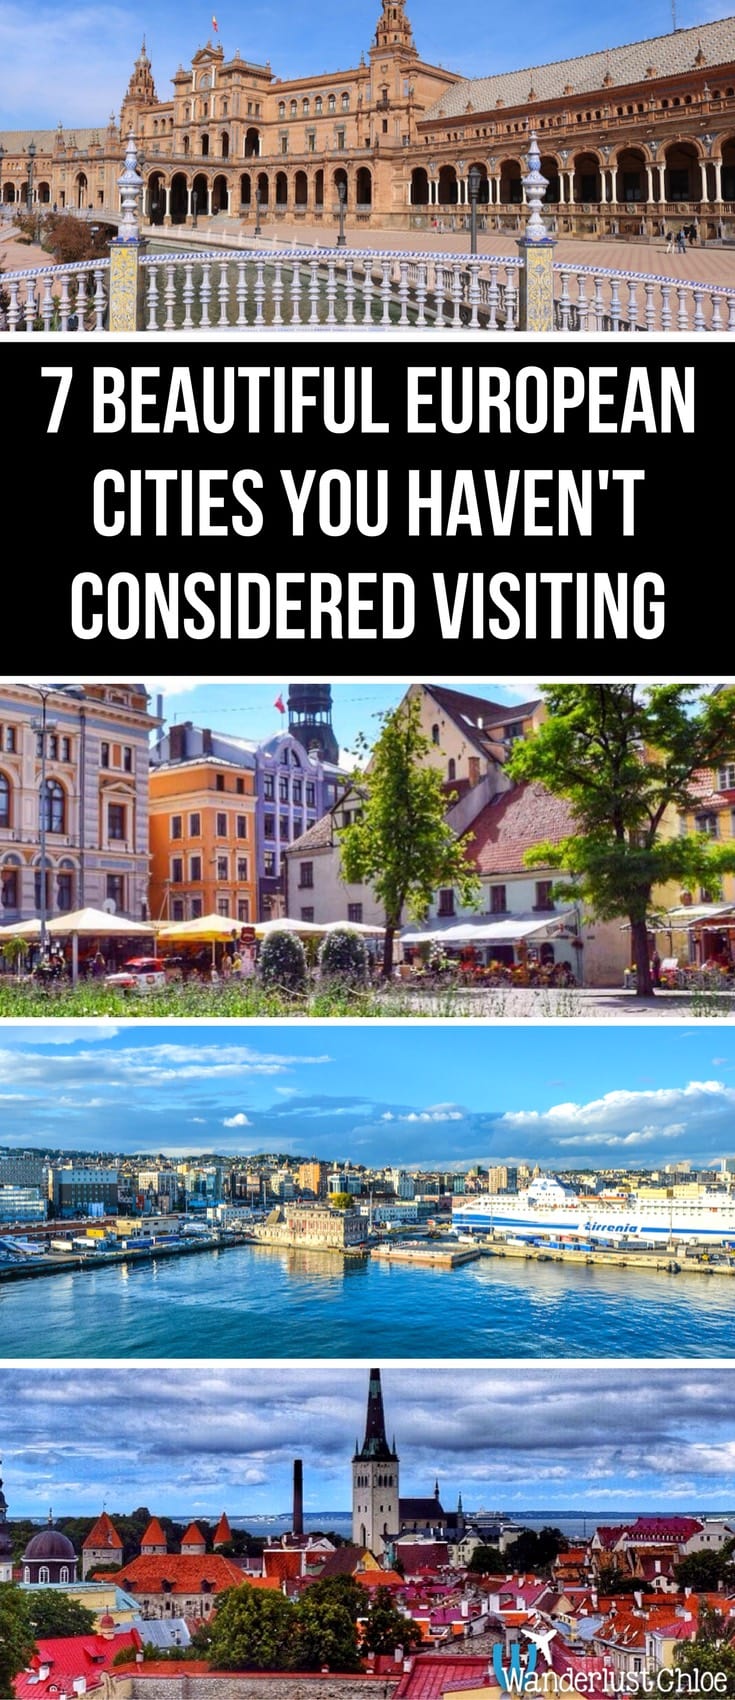 7 Beautiful European Cities You Haven't Considered Visiting